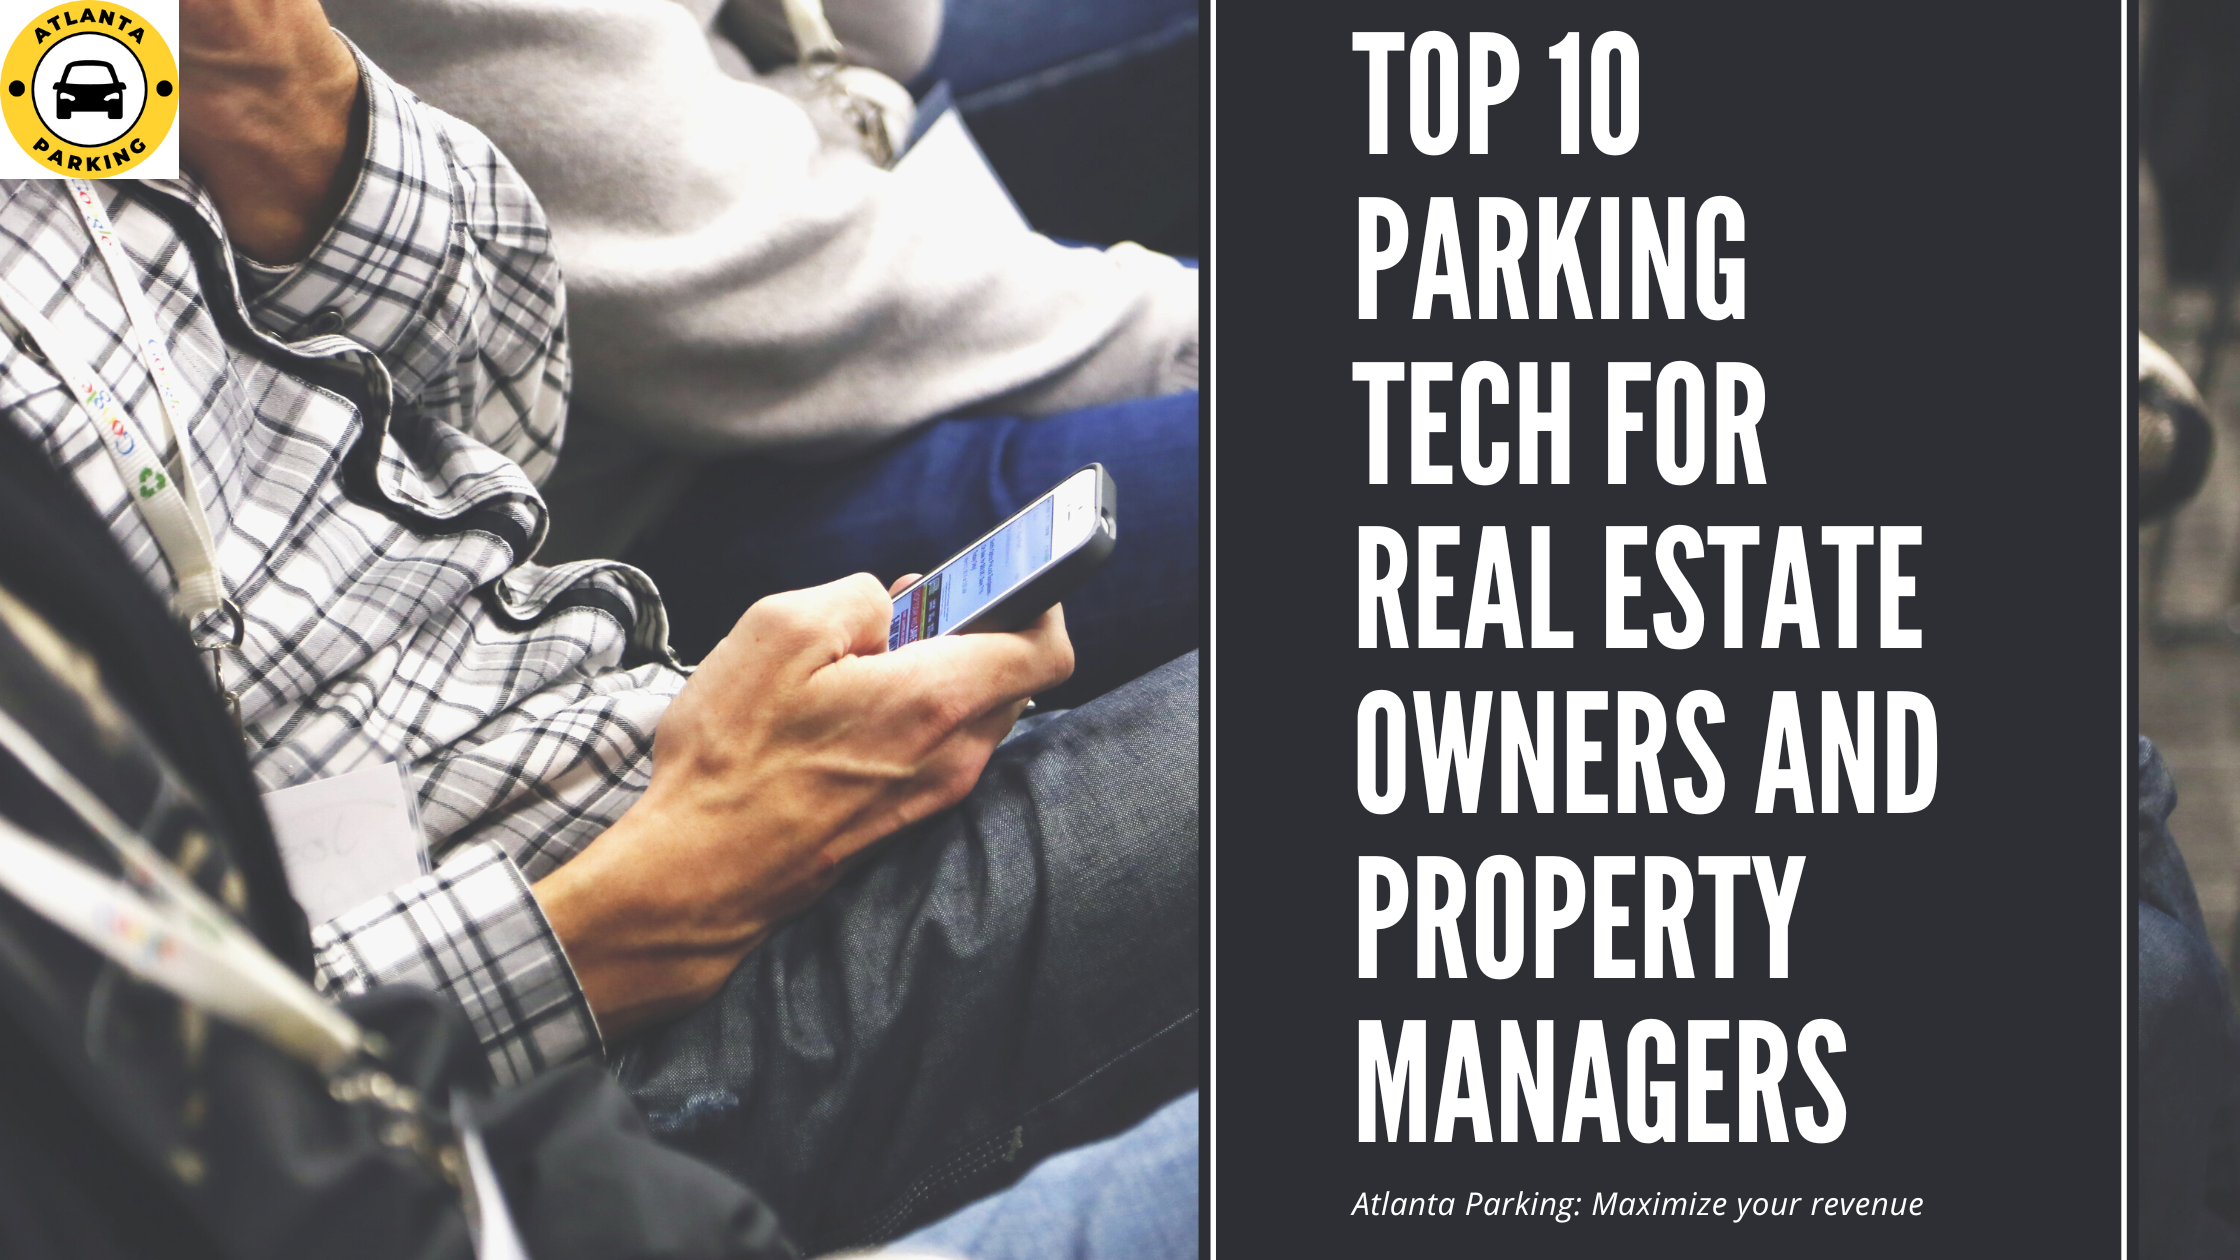 Top 10 parking tech for real estate owners and property managers